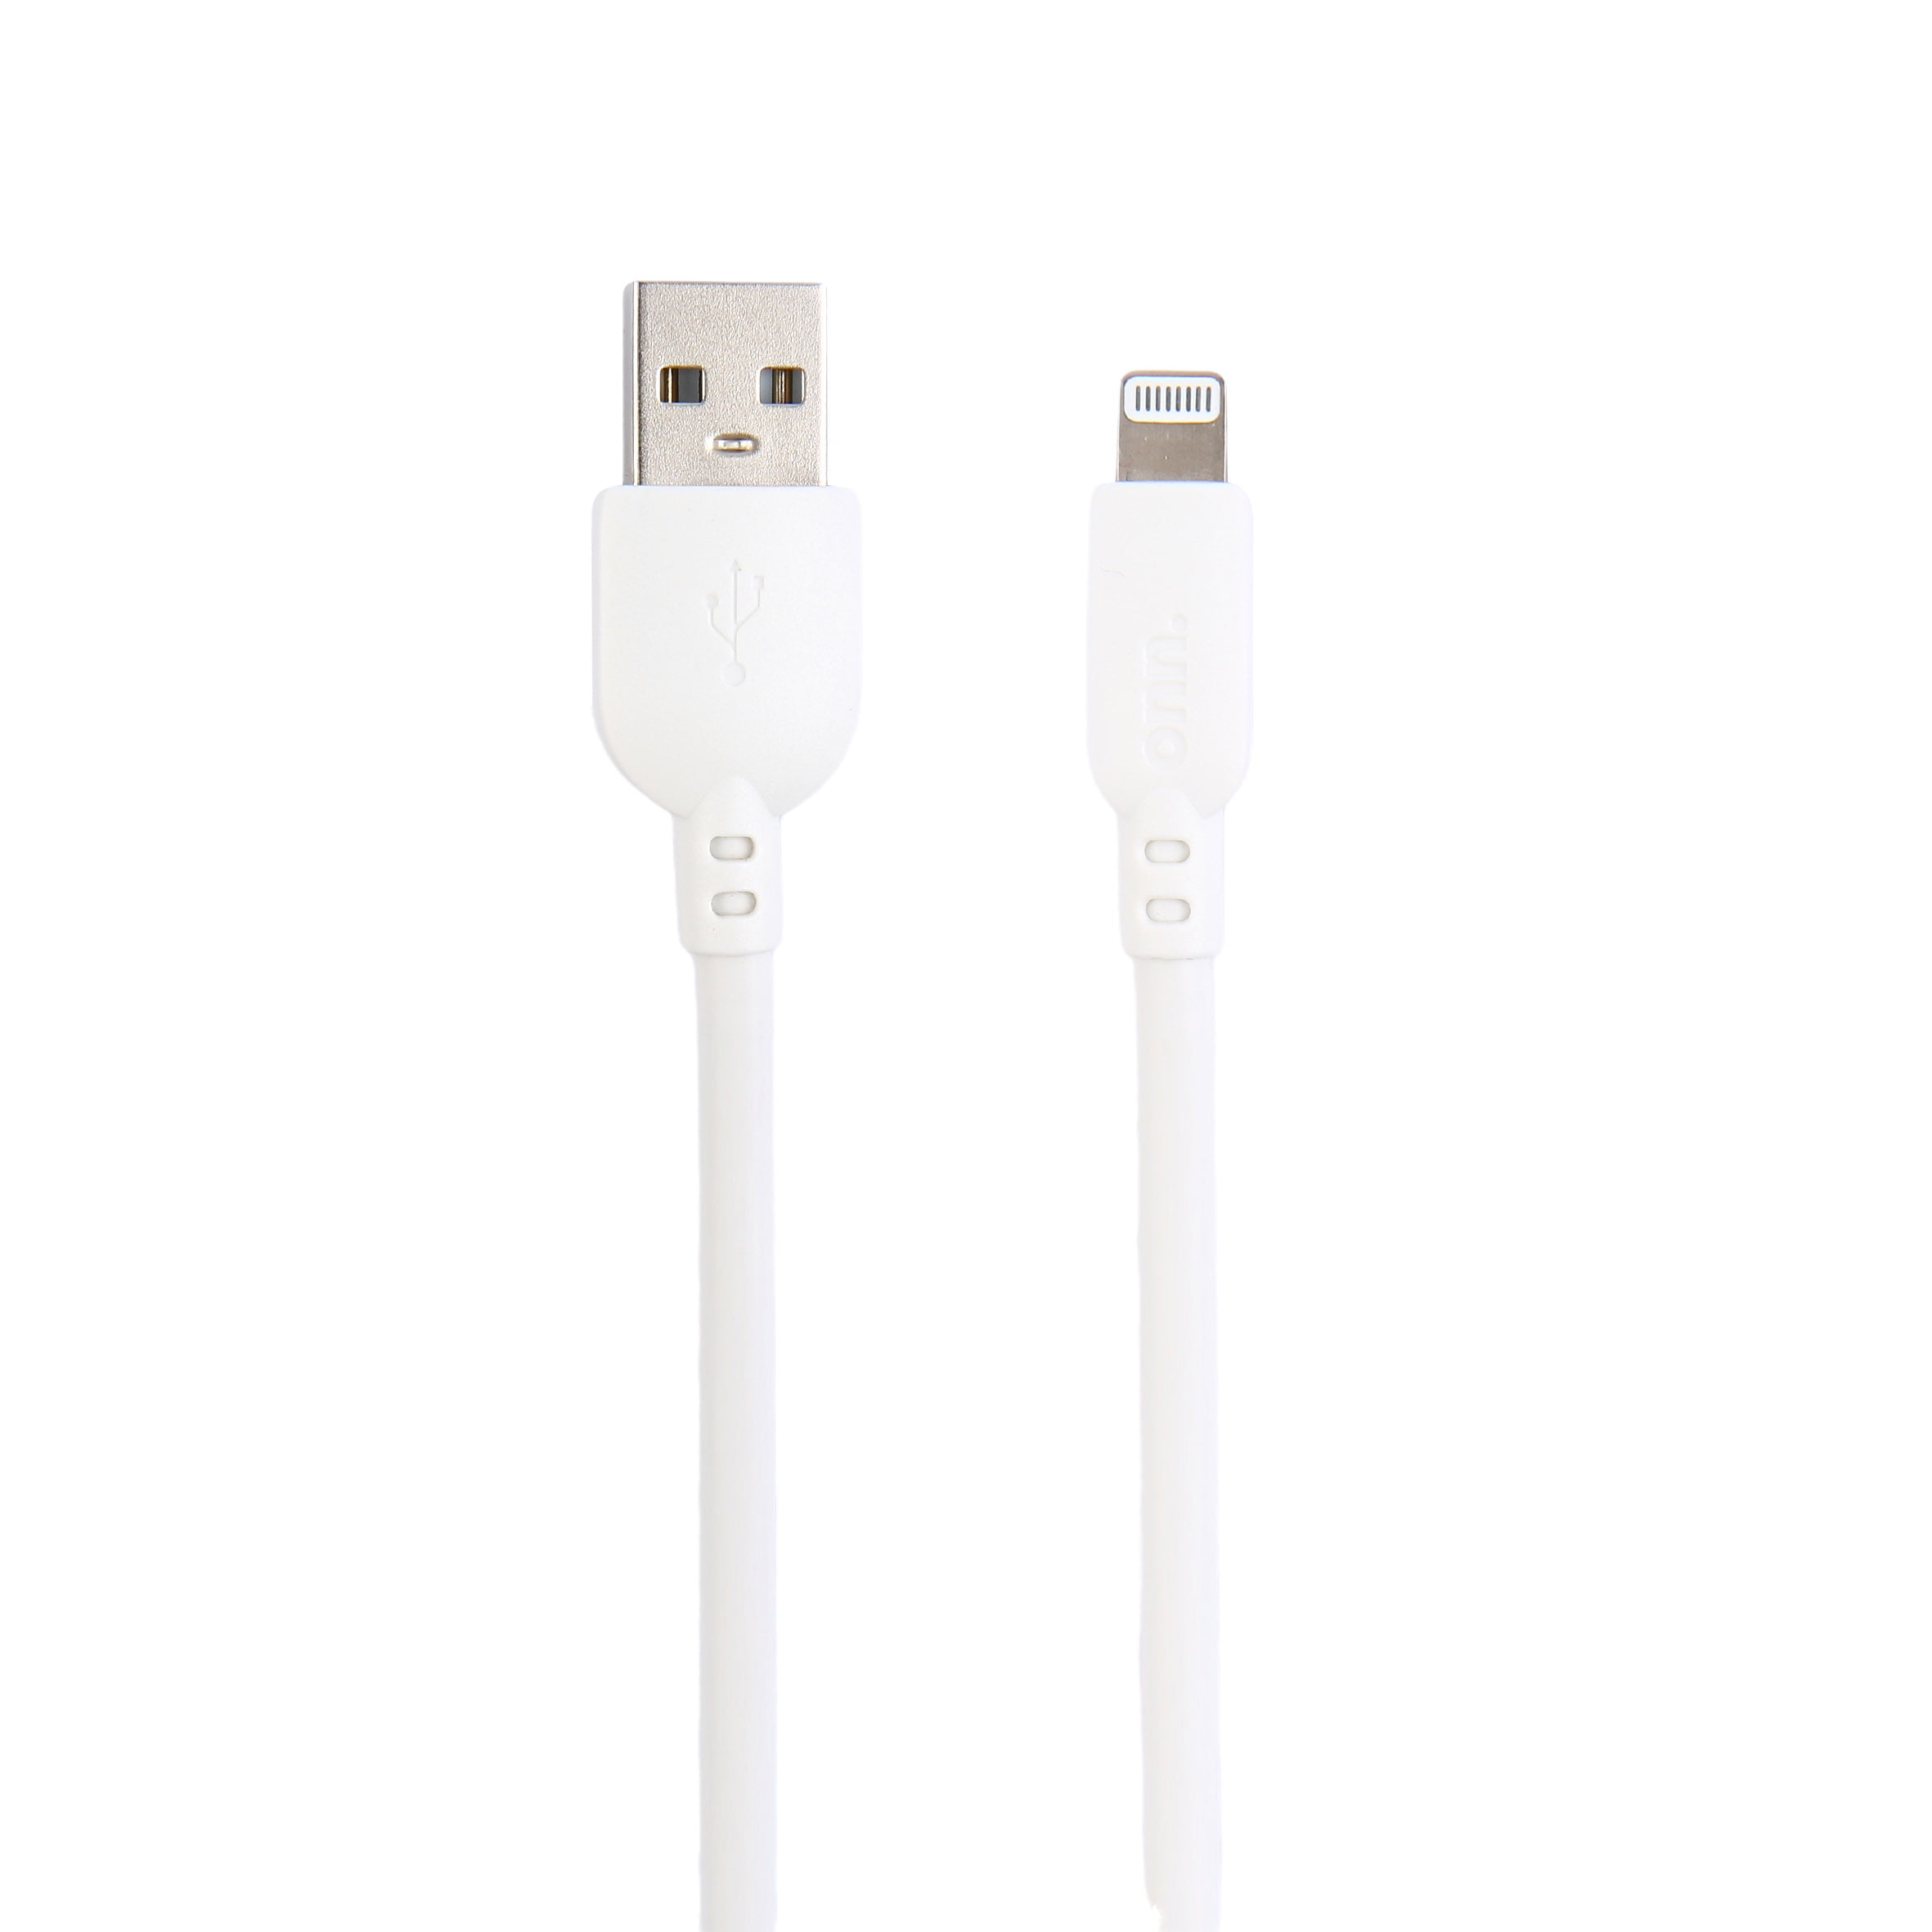 4 Sync & Charge Cable for for iPad 3 iPad 2 iPhone 4S ONN 10 ft 3m 3G  iPod 